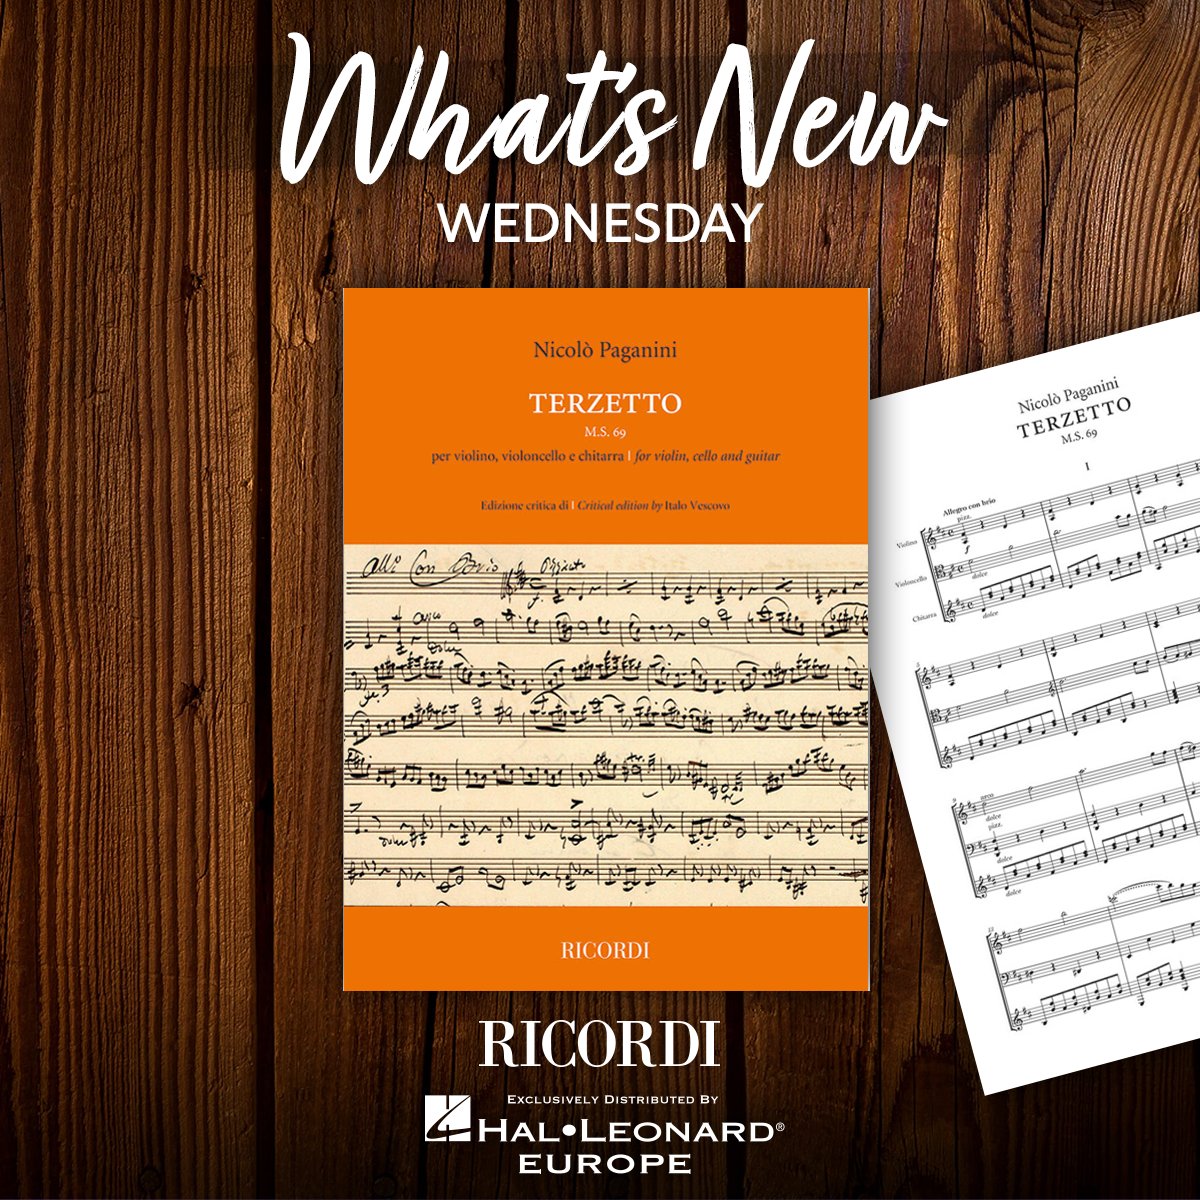 Our #WhatsNewWednesday this week is Ricordi’s latest critical edition of Paganini’s Terzetto for violin, cello and guitar! 

Click on the image description to learn more about this new work. Now available online and in your local music store.